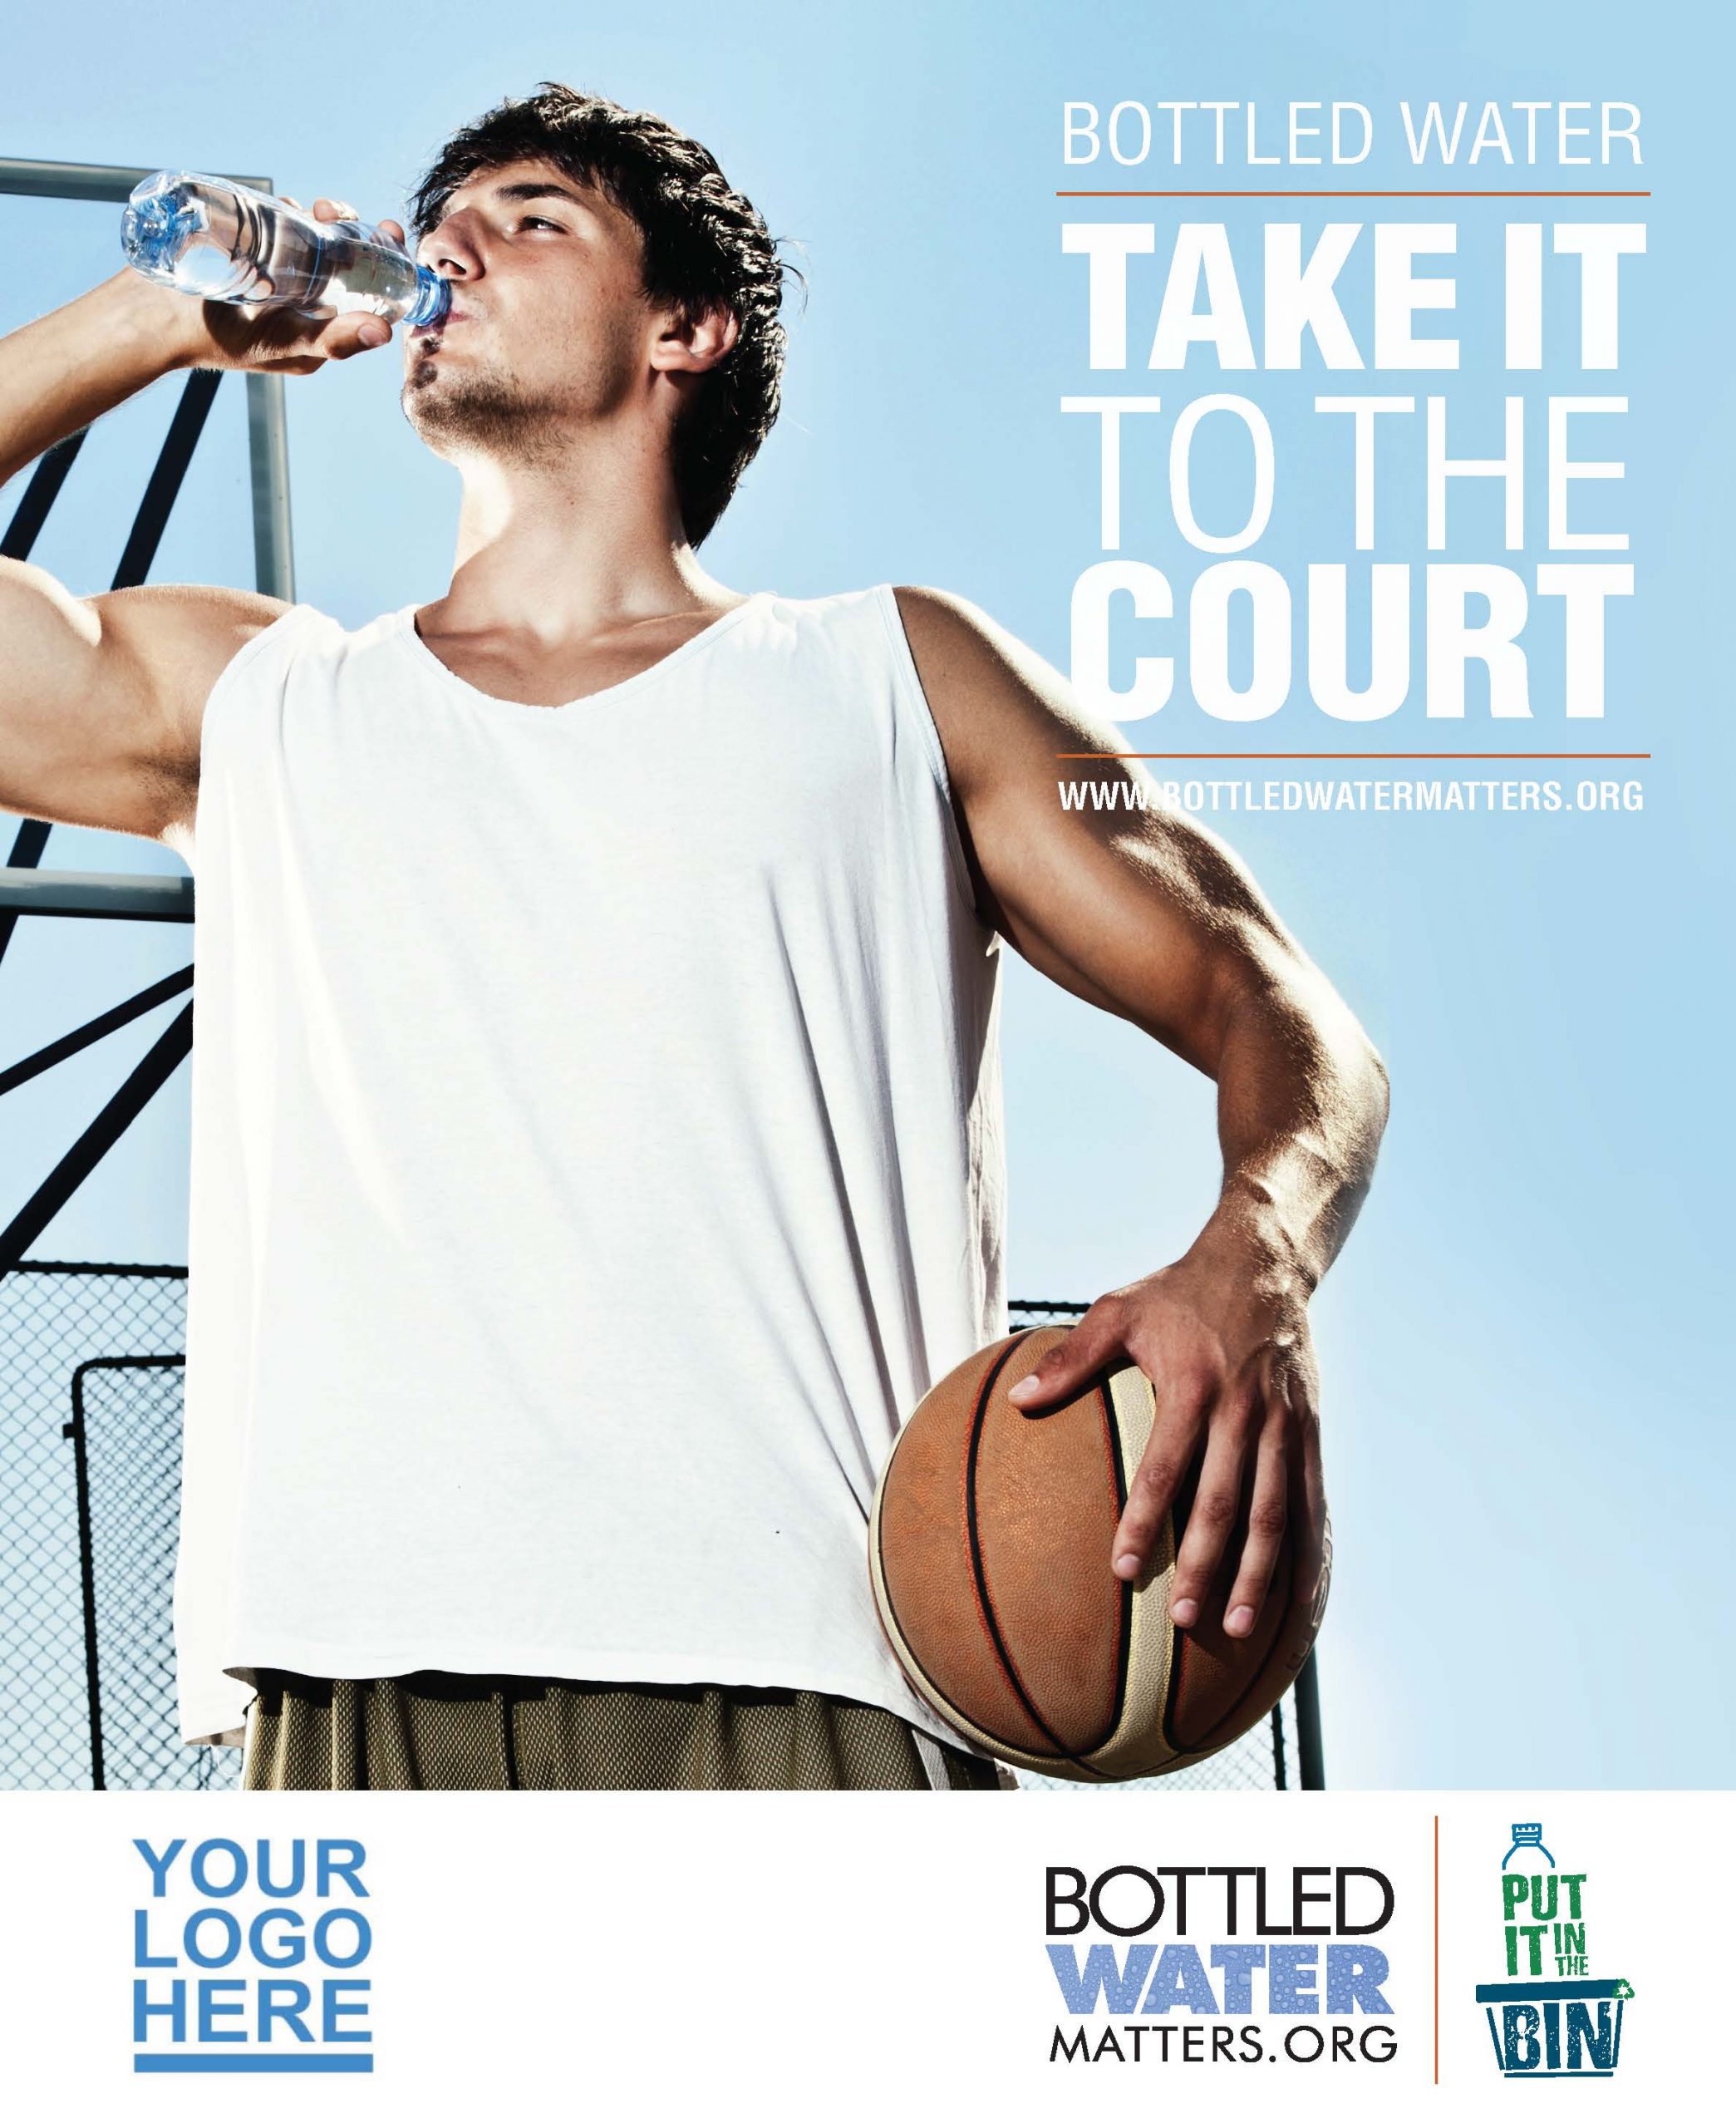 TakeItToTheCourt Member Scaled, Bottled Water | IBWA | Bottled Water